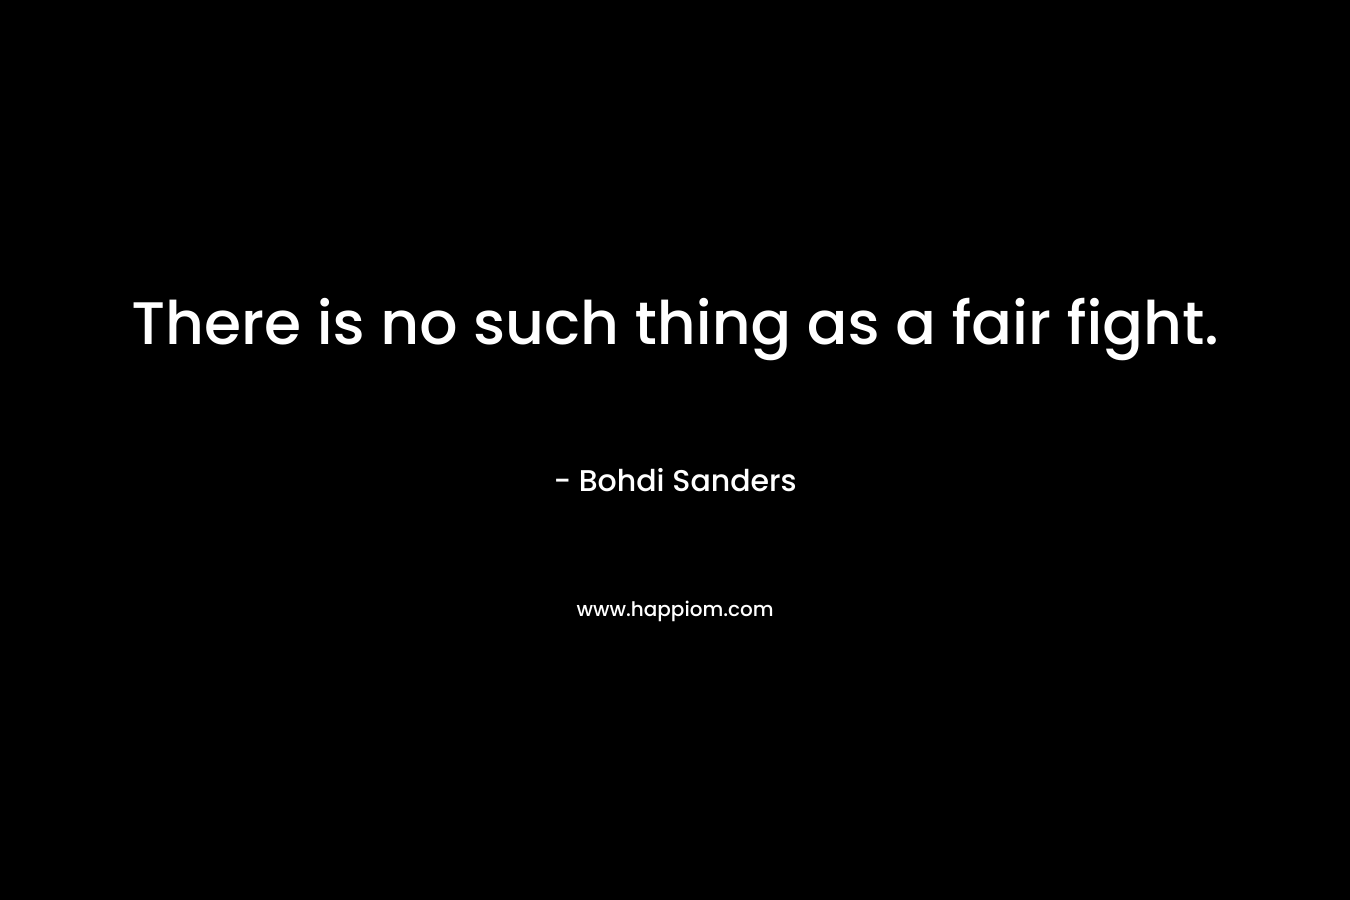 There is no such thing as a fair fight. – Bohdi Sanders